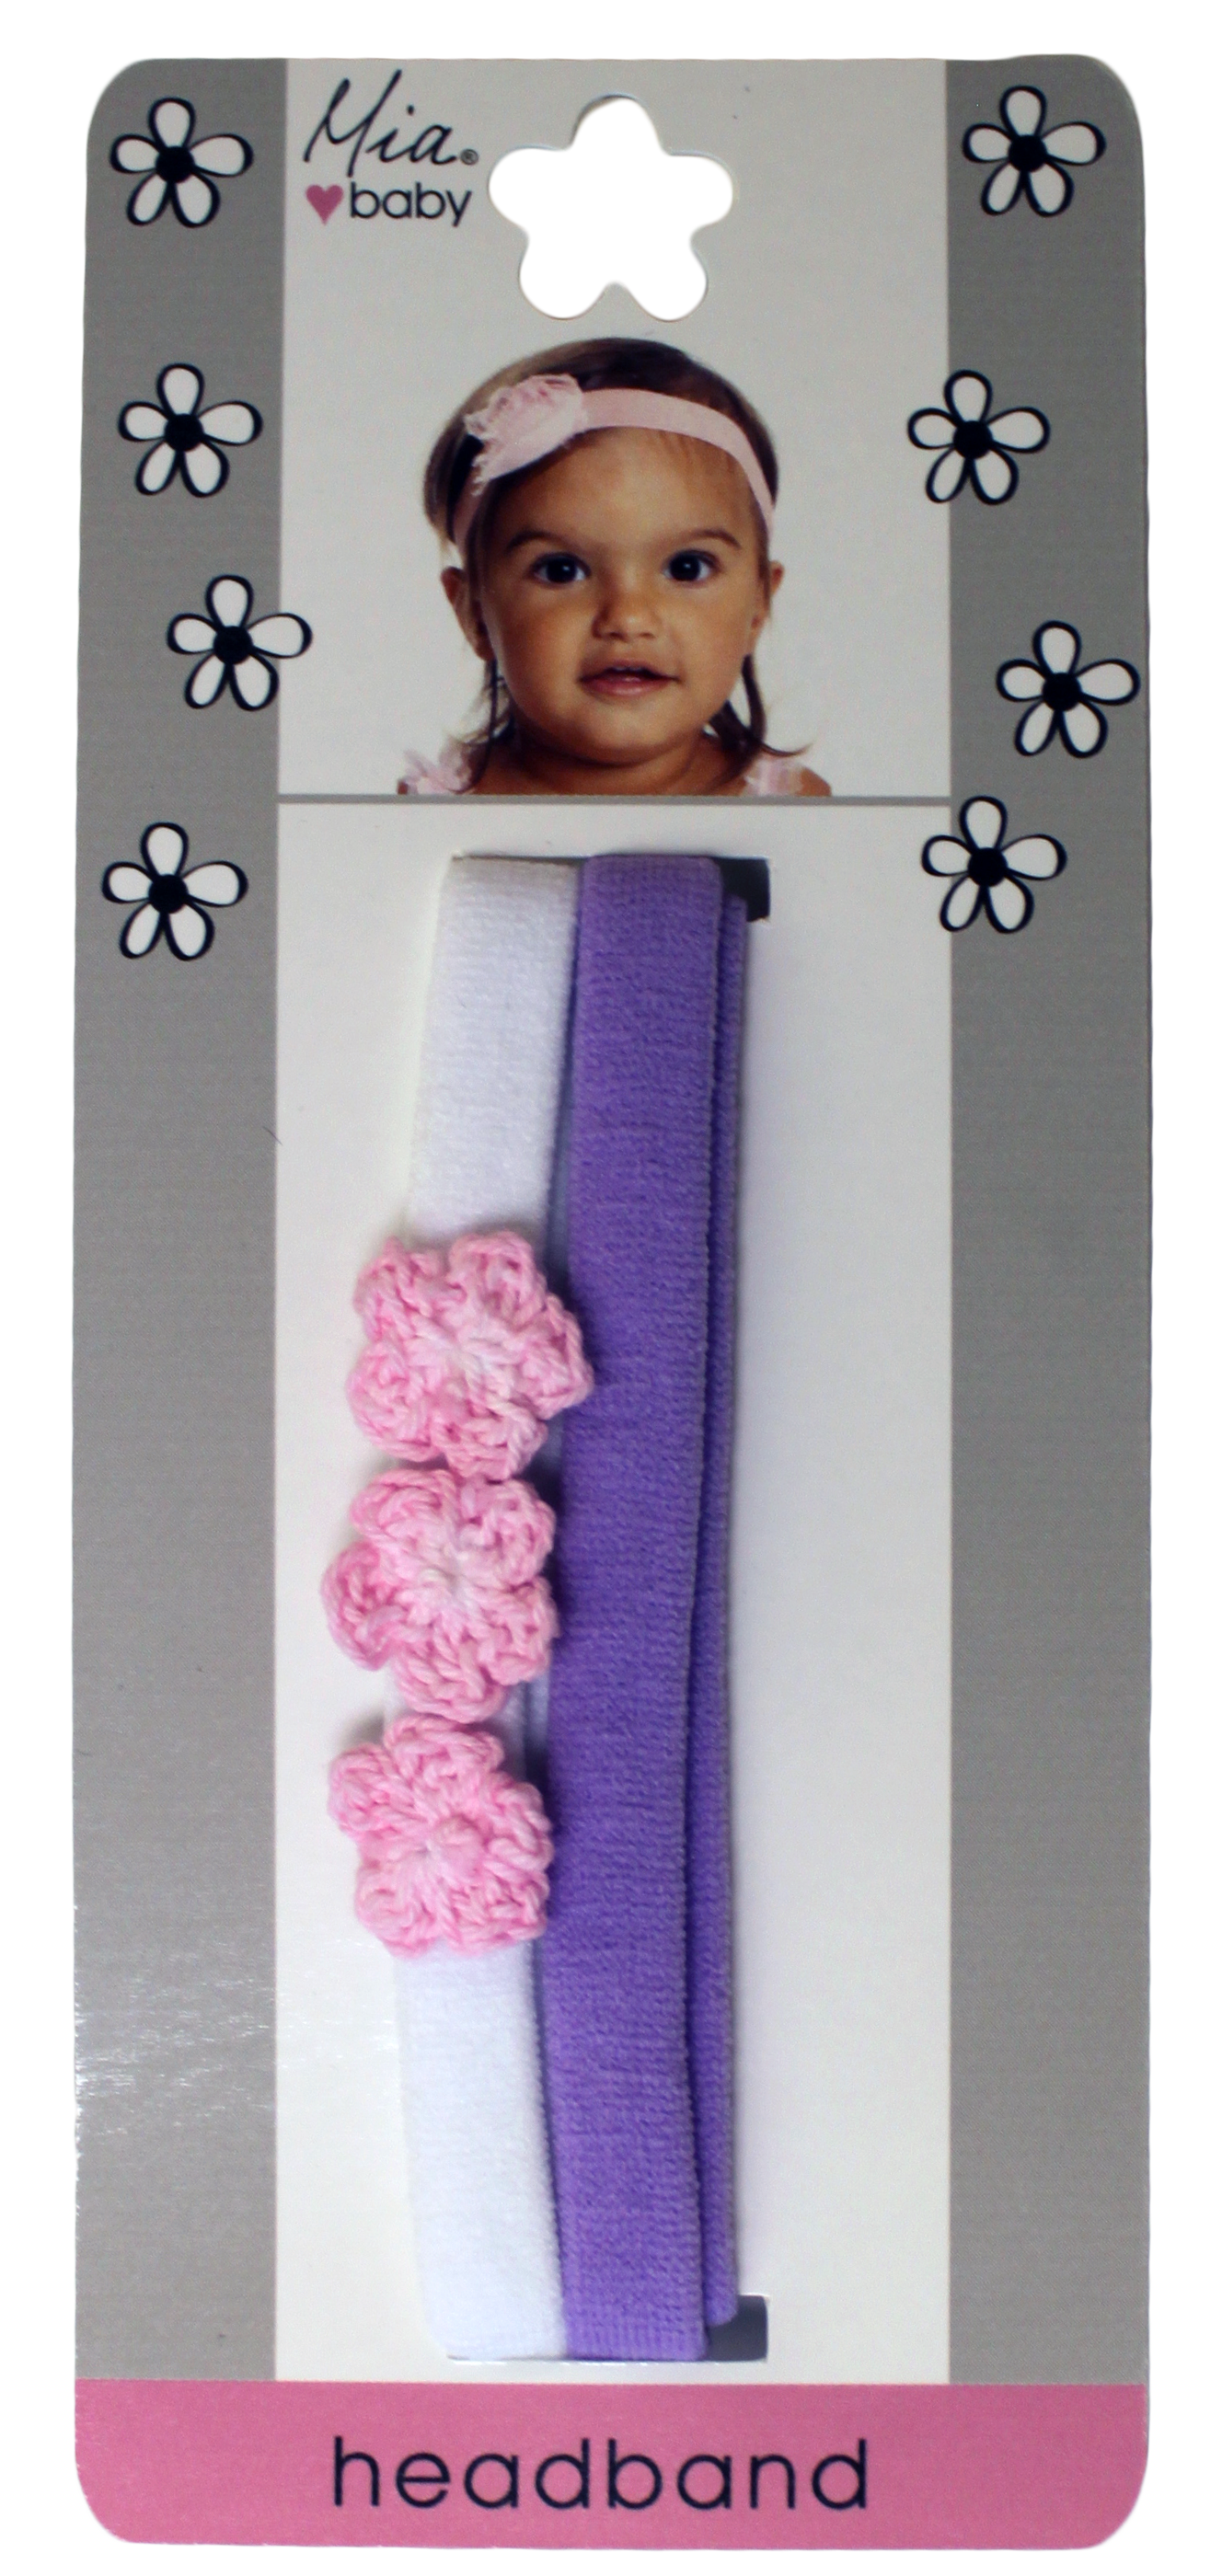 Mia® Baby Headbands Terry Cloth with Crocheted Flowers - white with pink flowers and solid purple colors - shown on packaging - invented by #MiaKaminski #MiaBeauty #Mia #Beauty #Baby #hair #hairaccessories #hairclips #hairbarrettes #love #life #girl #woman